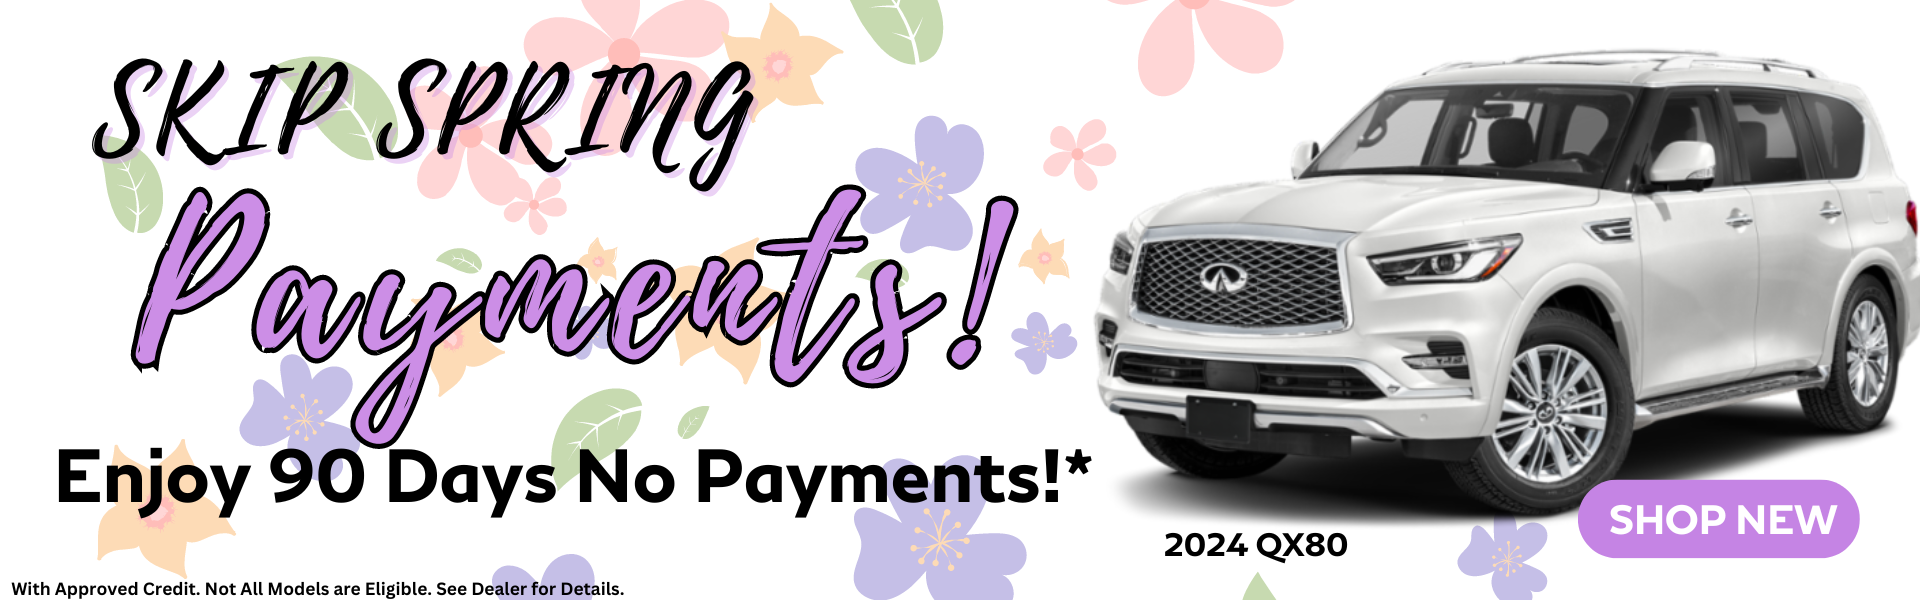 Skip Spring Payments